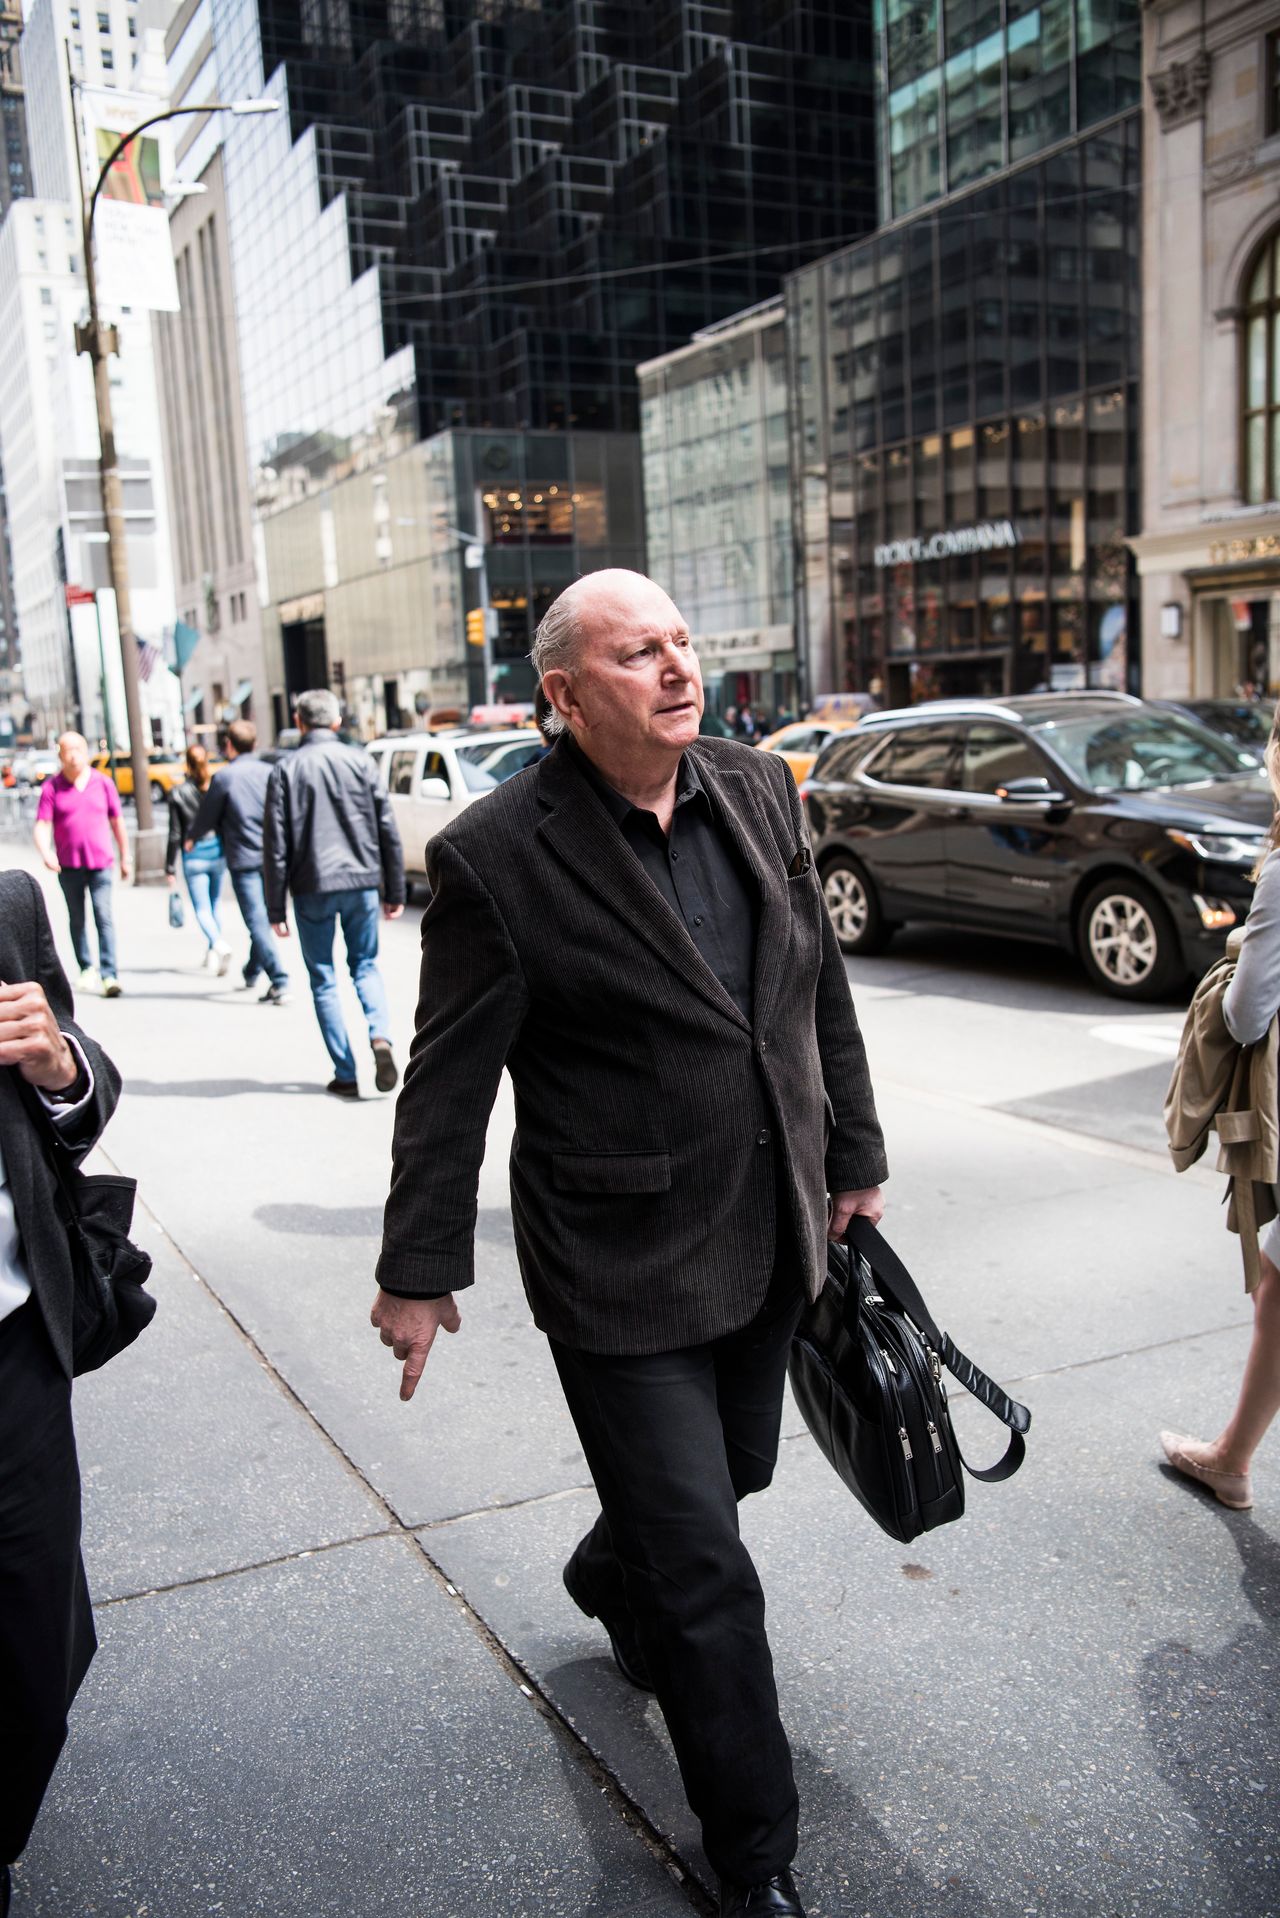 Jerome Rose walks along Fifth Avenue in Manhattan. He has moved to a ground-floor apartment after a fire in his previous building killed four people in 1998.